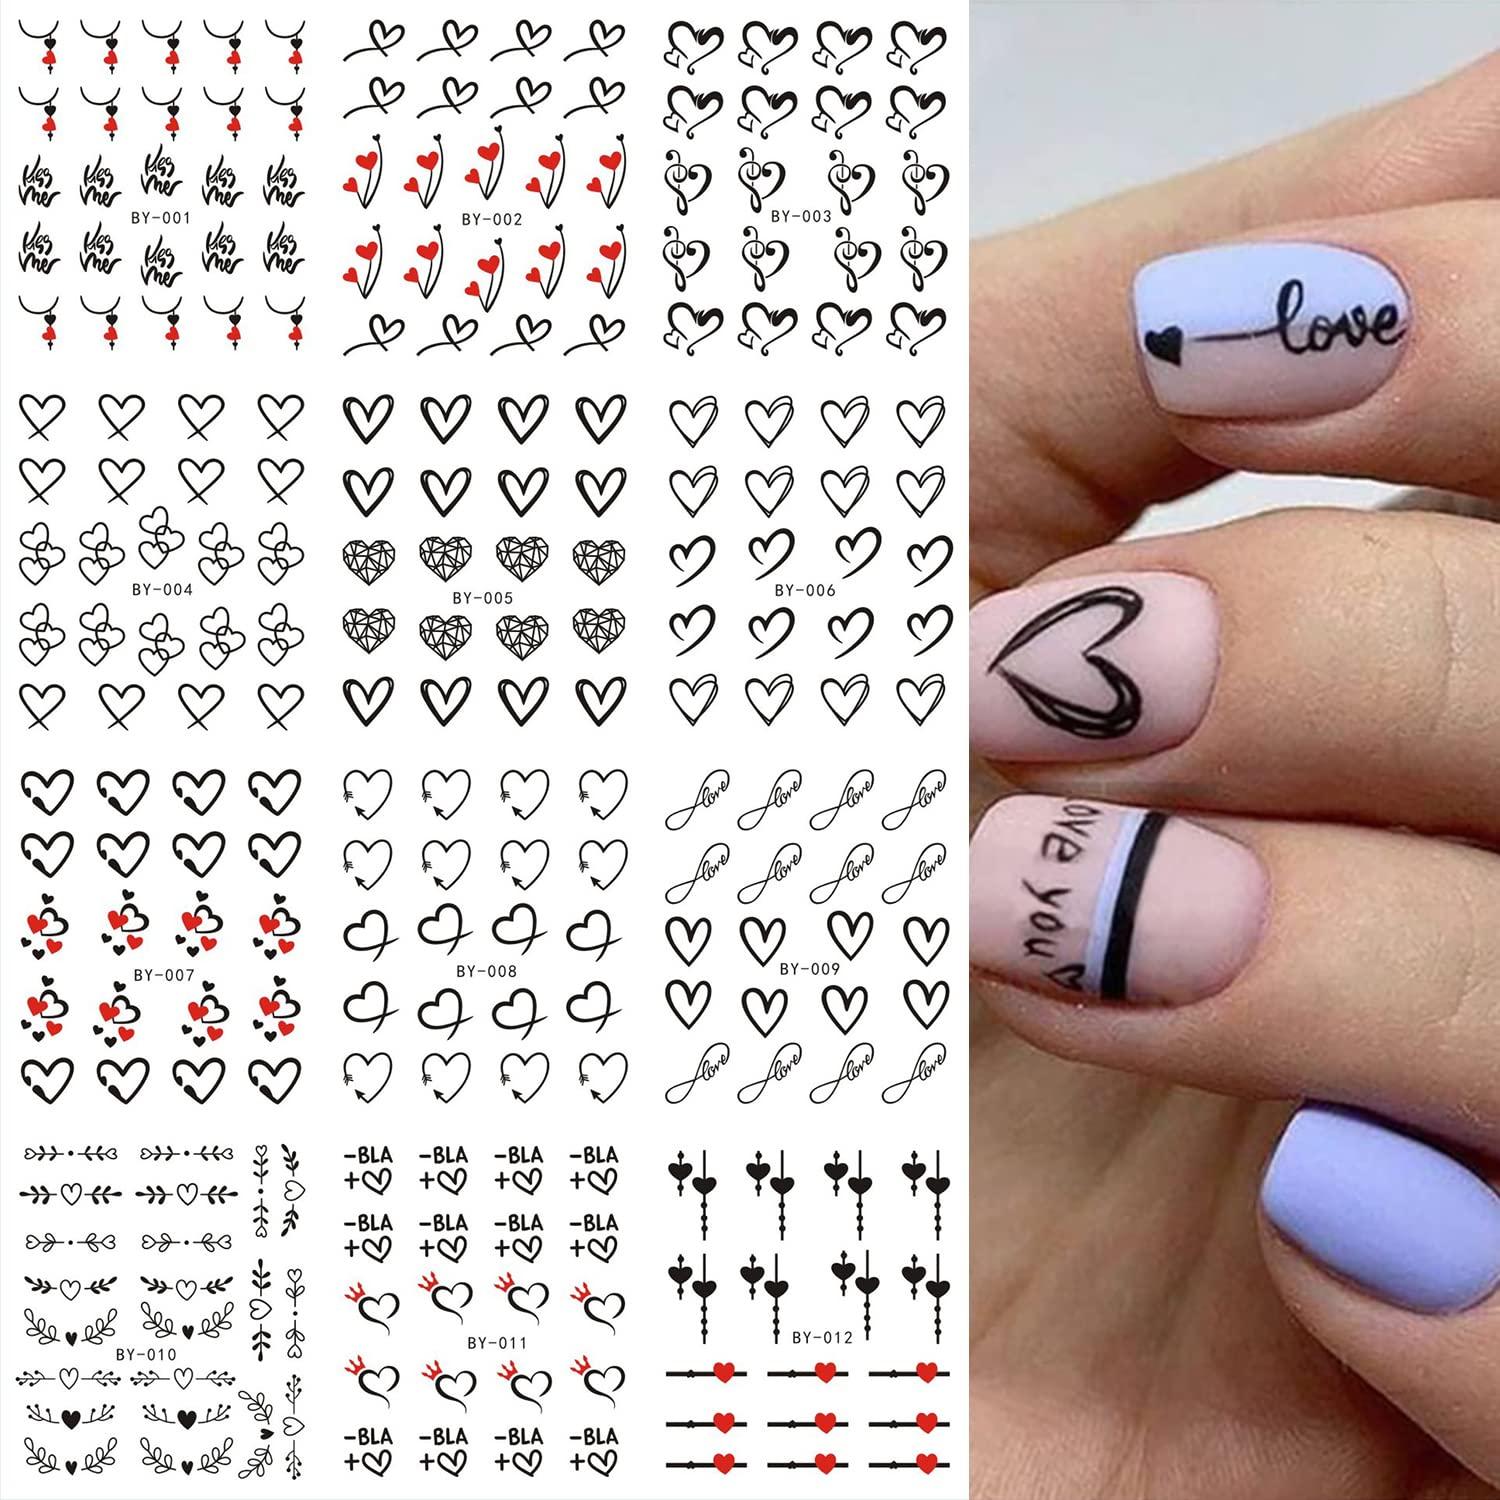 Cute Nail Art Stickers Nail Decals Valentine Cartoon Heart Nail Design  Stickers for Women Girls Valentine Nail Stickers Decoration Accessories DIY  Manicure B